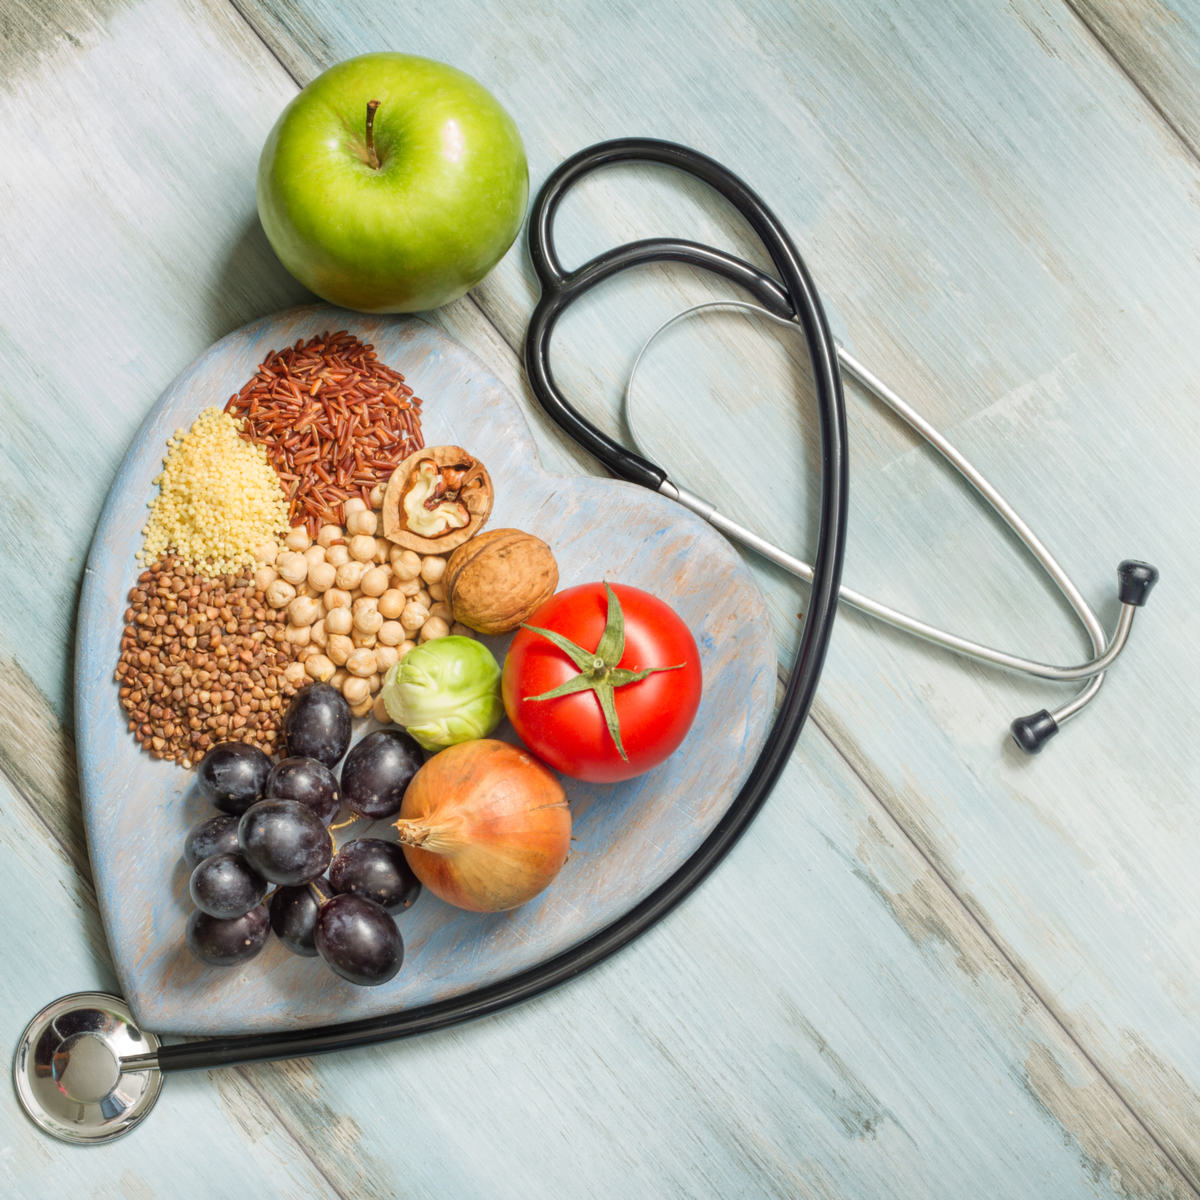 Doctor's stethoscope surrounding healthy plant foods